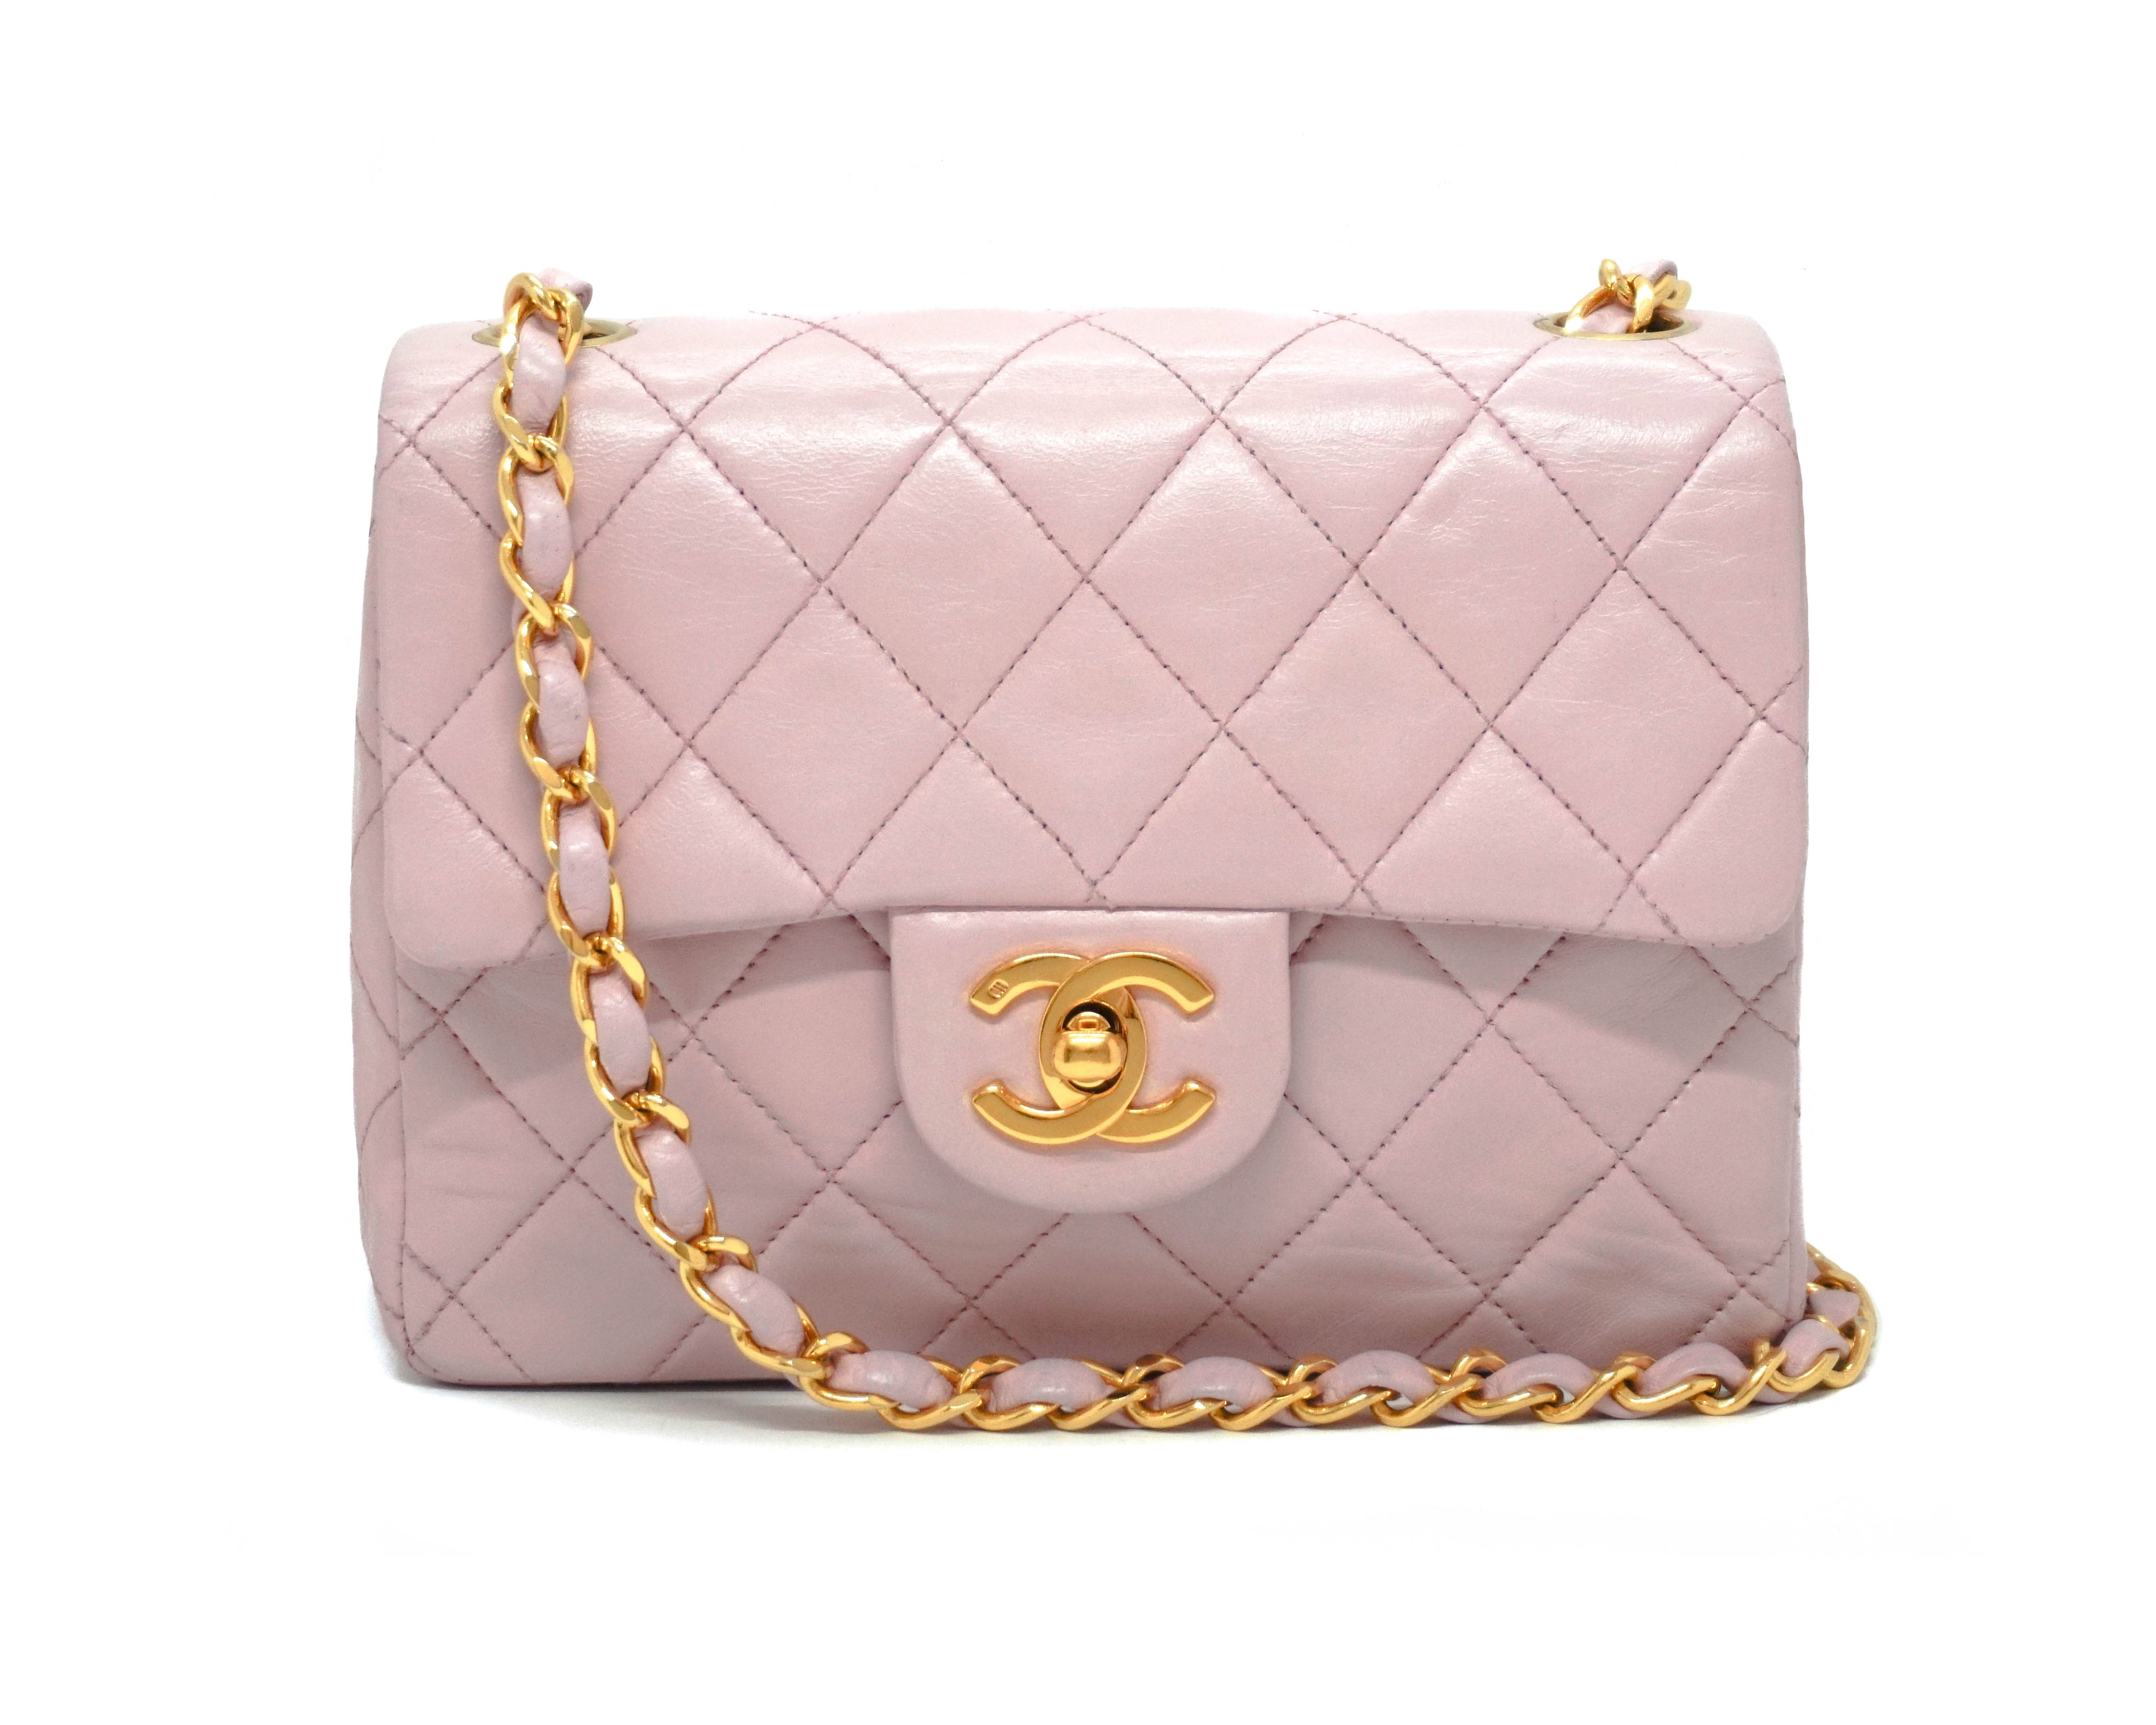 Chanel Vintage Pink Lambskin Classic 2.55 Flap Bag – Classic Coco Authentic Vintage Luxury